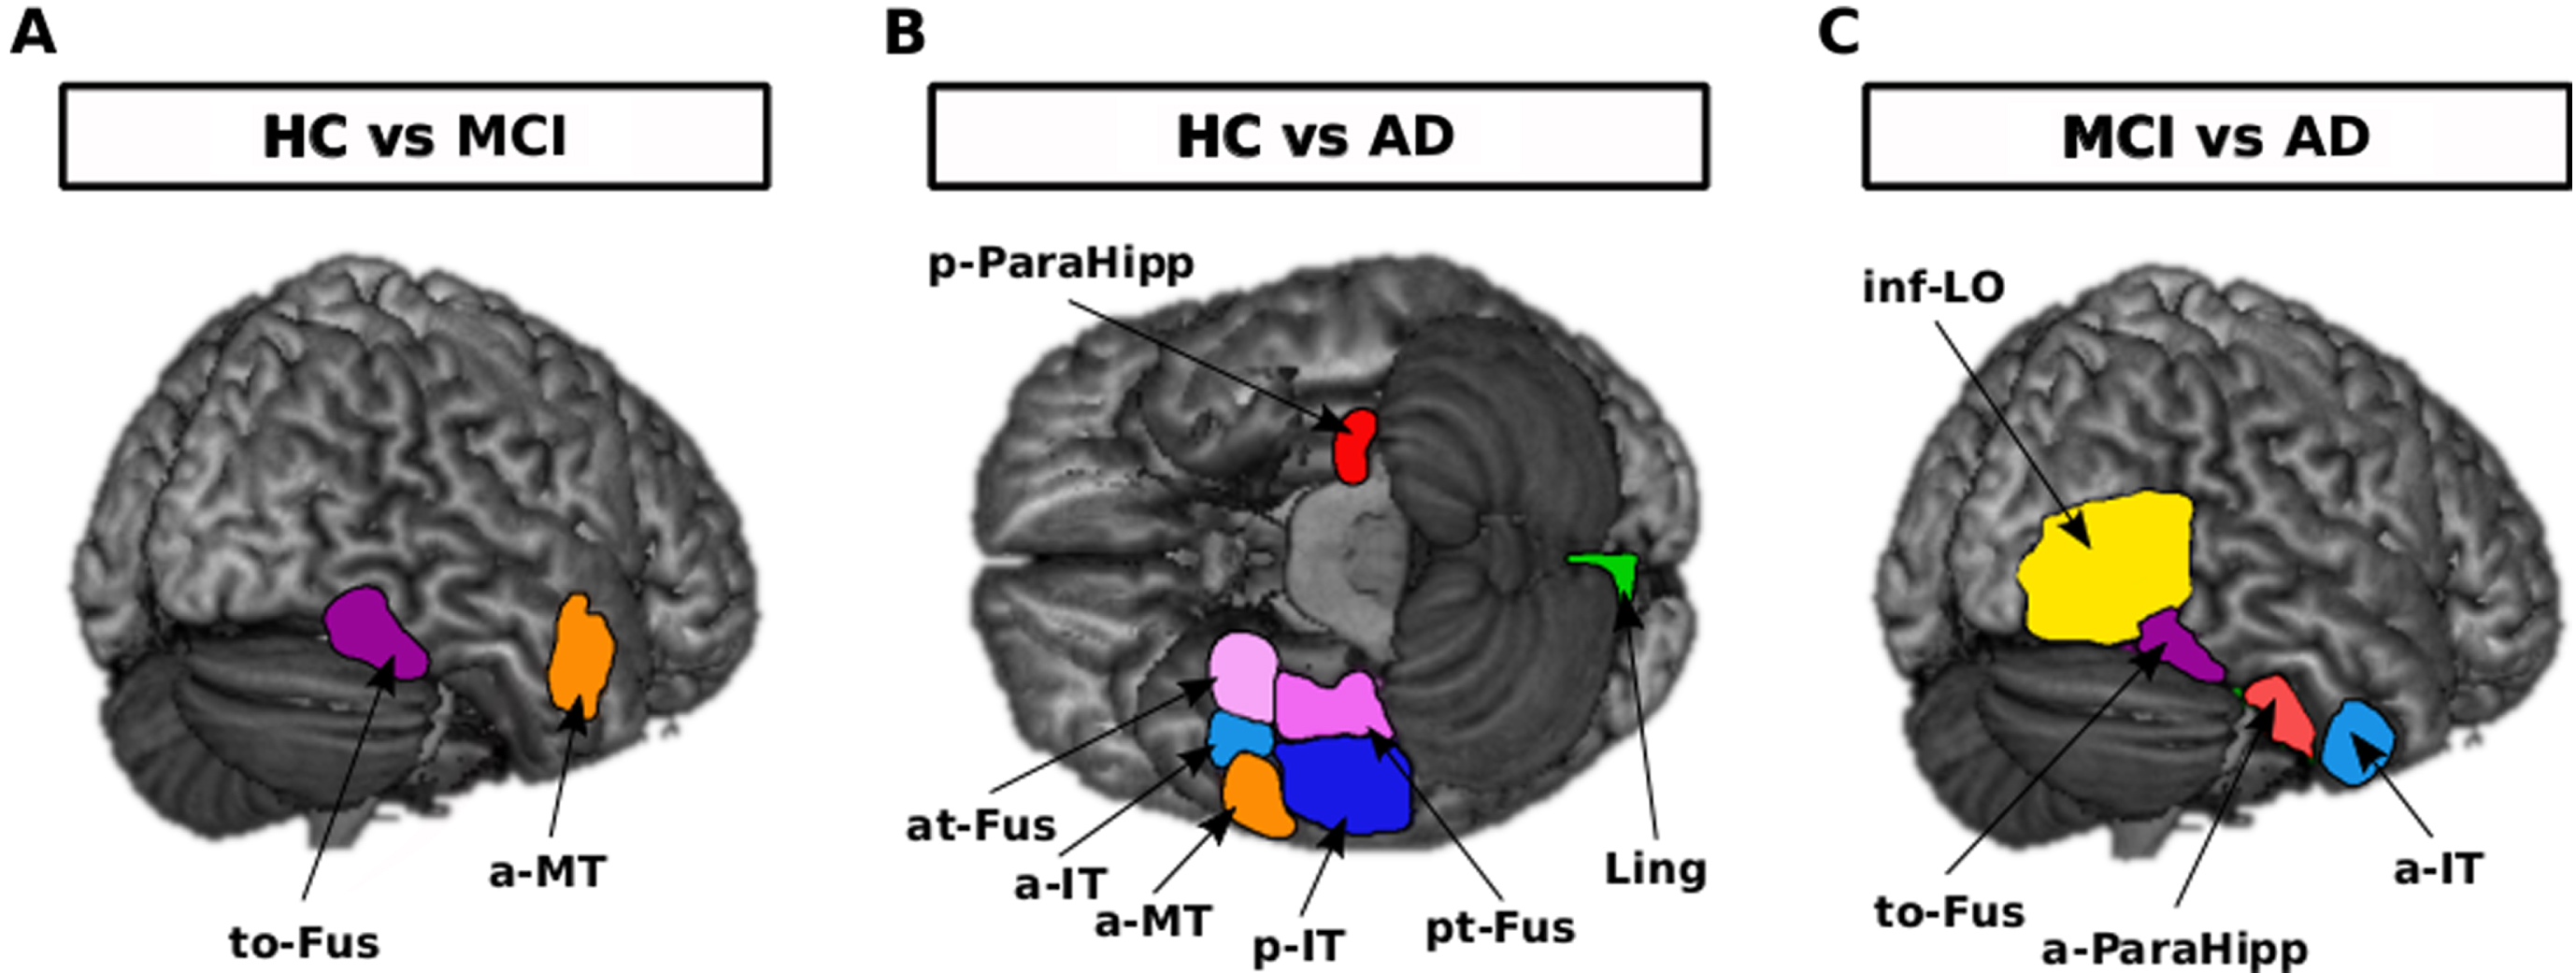 Brain activation differences in response to all images of animal and non-animal within regions of interest when comparing each two groups, uncorrected p-value< = 0.01. A) Right to-Fus and a-MT were more activated in the HC than in the MCI group. B) Left p-ParaHipp and right at-Fus, a-IT, a-MT, p-IT, pt-Fus and Ling were more activated in the HC than in the AD group. C) Right inf-LO, to-Fus, a-ParaHipp and a-IT were more activated in the MCI than in the AD group. to-Fus, temporal occipital fusiform cortex; at-Fus, temporal fusiform cortex, anterior division; pt-Fus, temporal fusiform cortex, posterior division; a-Mt, middle temporal gyrus, anterior division; a-IT, inferior temporal gyrus, anterior division; p-IT, inferior temporal gyrus, posterior division; p-ParaHipp, parahippocampal gyrus, posterior division; a-ParaHipp, parahippocampal gyrus, anterior division; Ling, lingual gyrus; inf-LO, lateral occipital cortex, inferior division. The only region that remained significant after FDR correction was right a-IT in HC versus AD comparison.